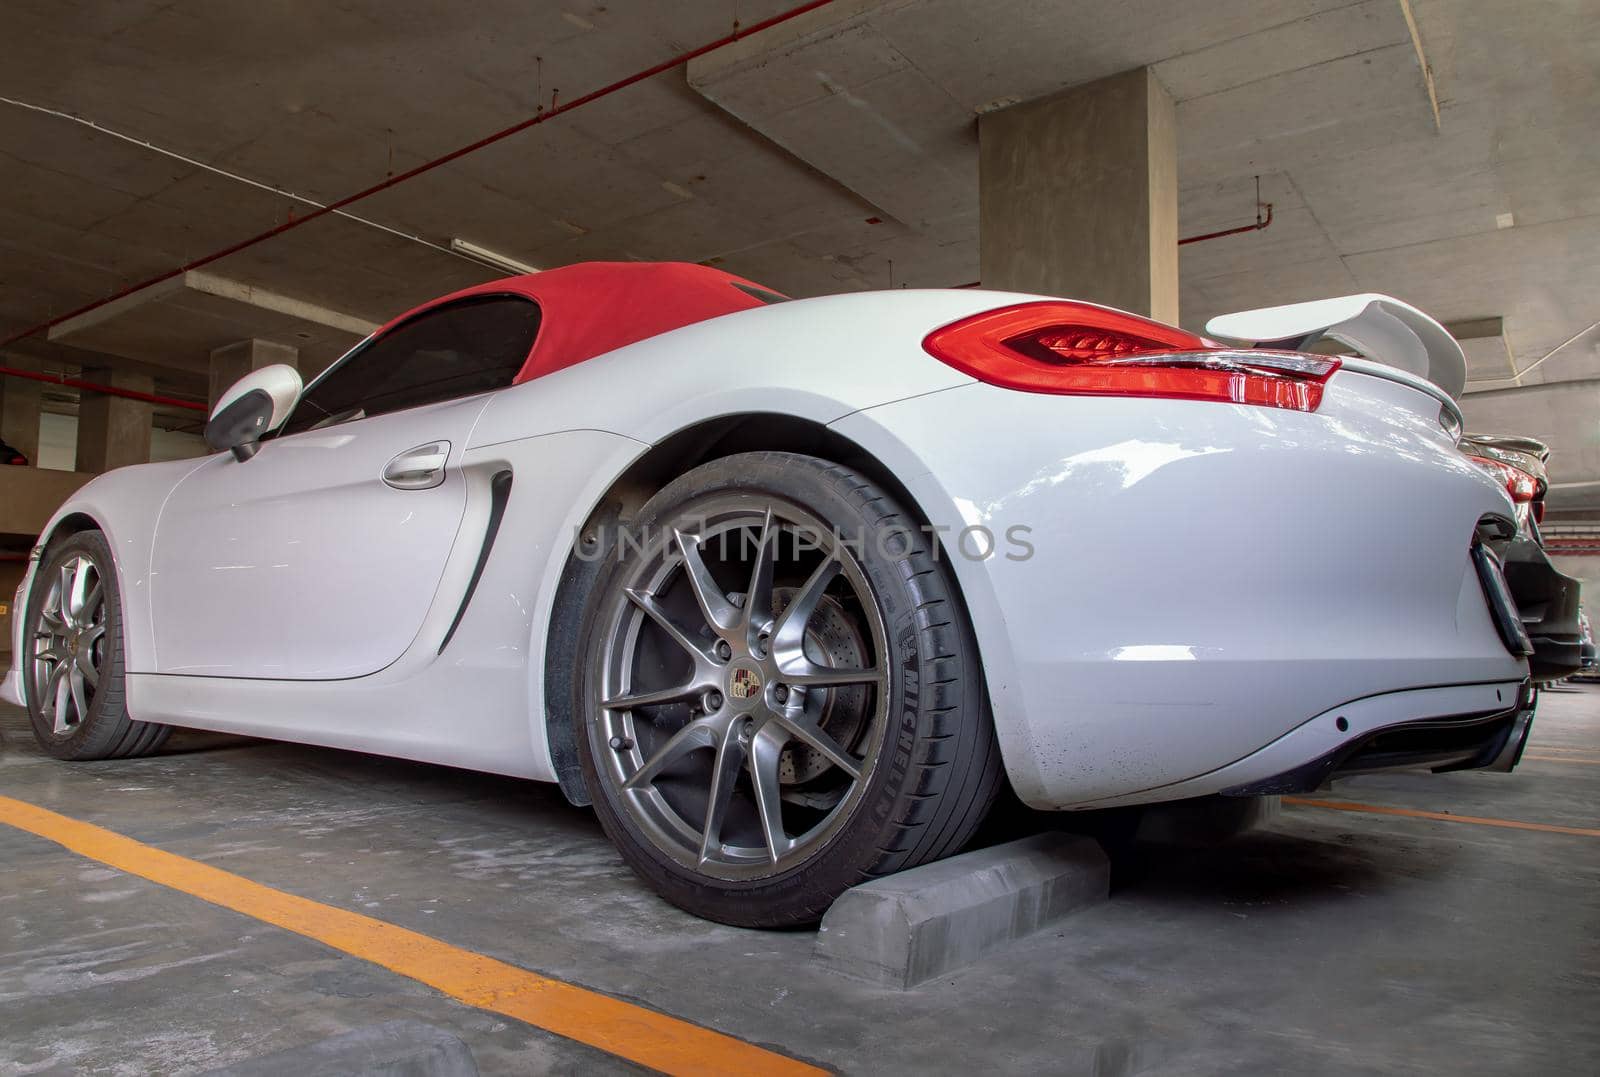 The side of Wheel of White Porsche Sports Car parked in the parking lot.  by tosirikul